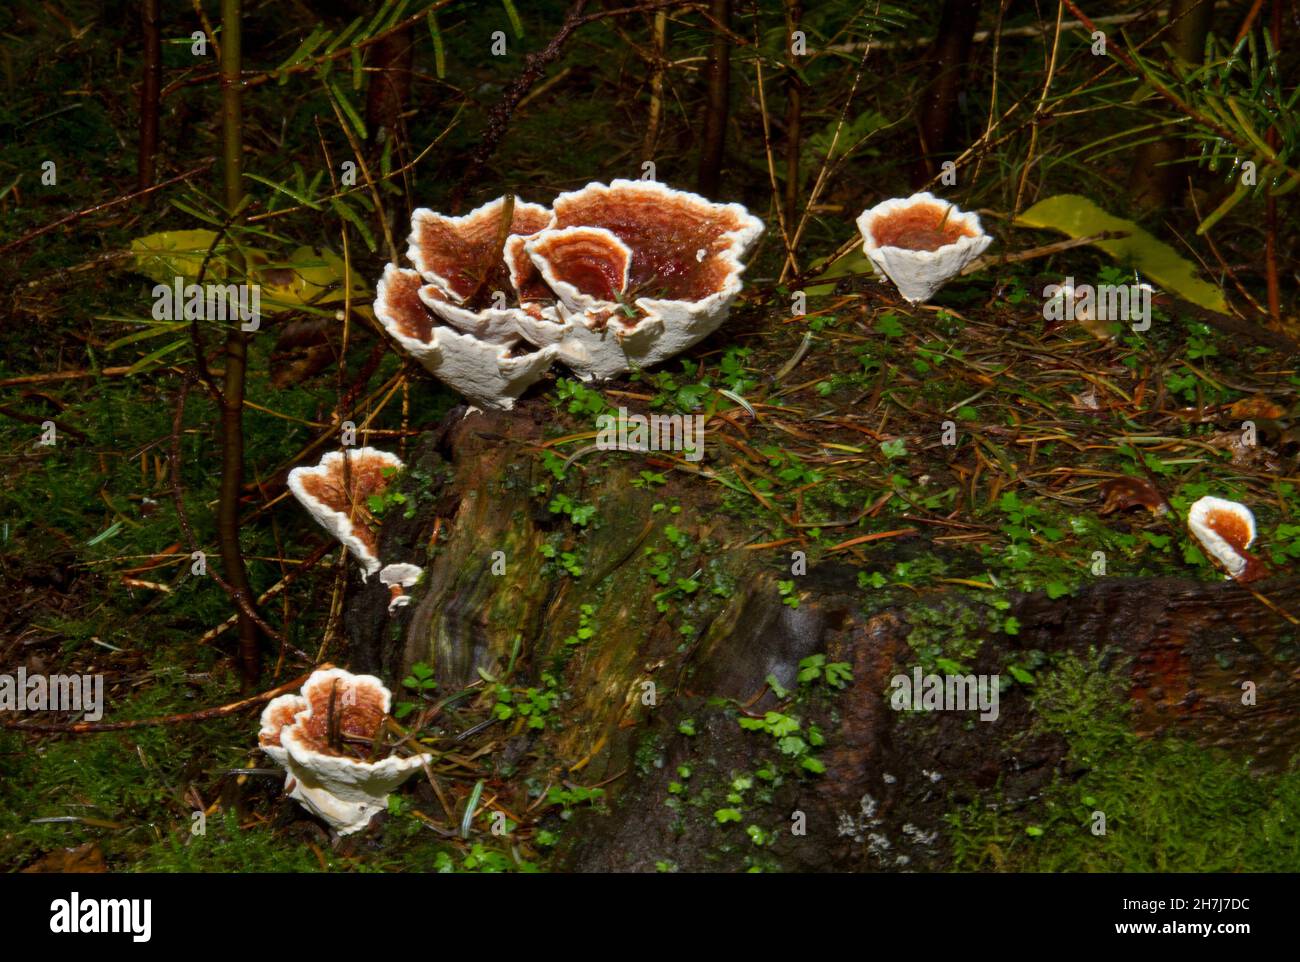 Fruiting bodies of the Root rot fungus Heterobasidion annosum on a tree stump in a forest Stock Photo